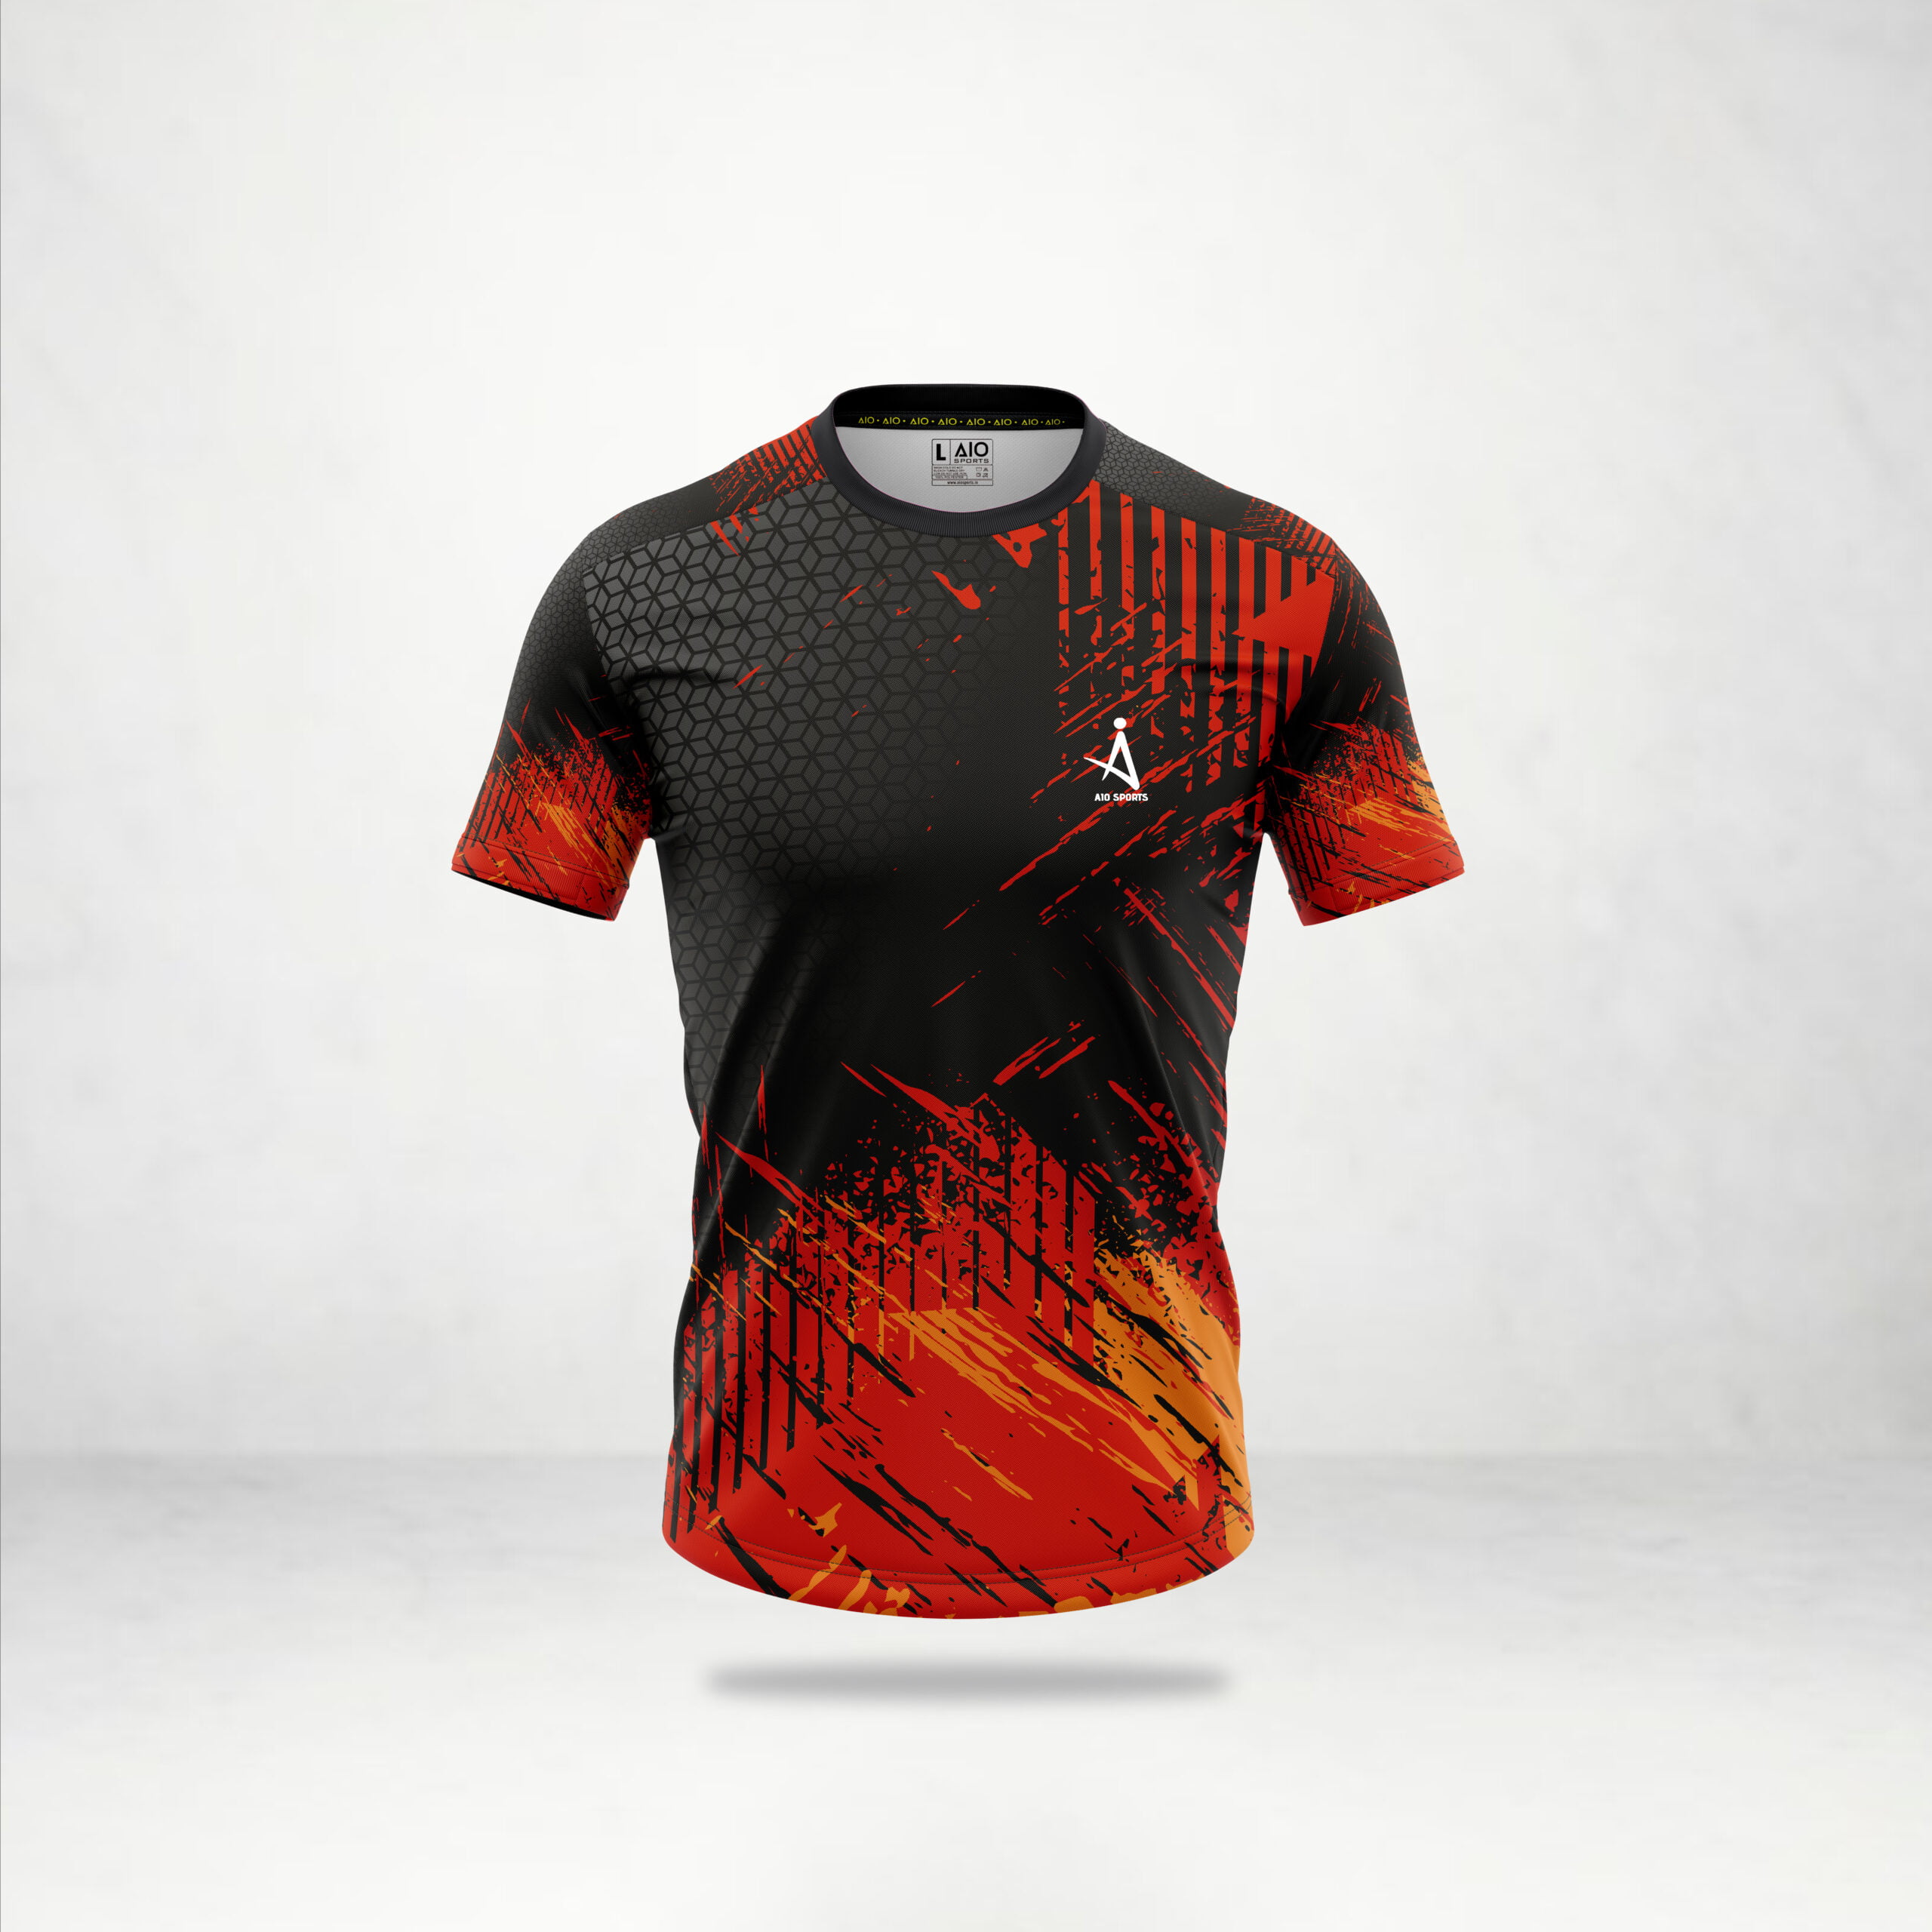 RED BLACK TRIBAL PATTERN - Aio Sports